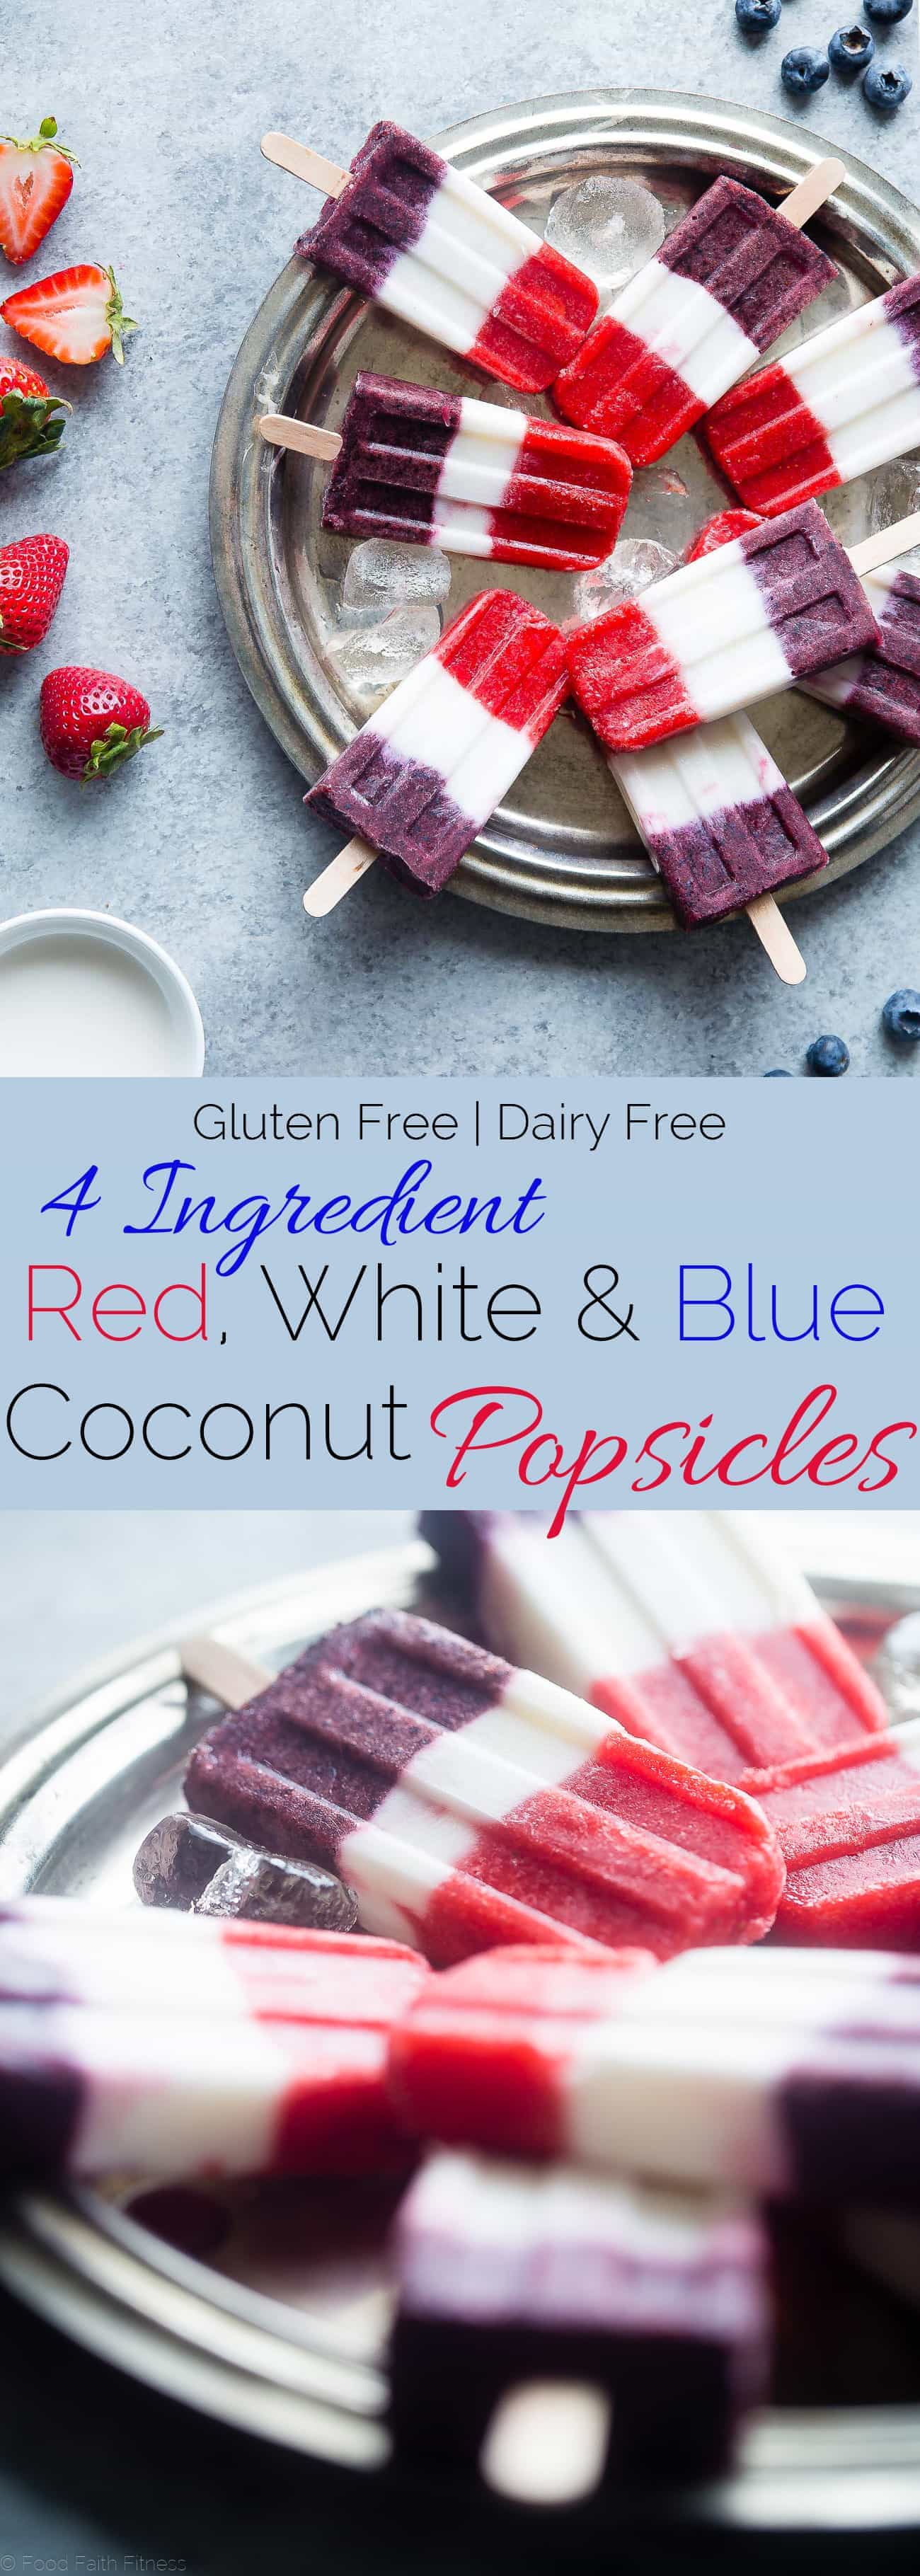 Vegan Red, White and Blue Popsicles - These healthy and dairy free coconut popsicles are a gluten free, patriotic summer treat that are only 4 ingredients and 110 calories! Perfect for July 4th! | Foodfaithfitness.com | @FoodFaithFit